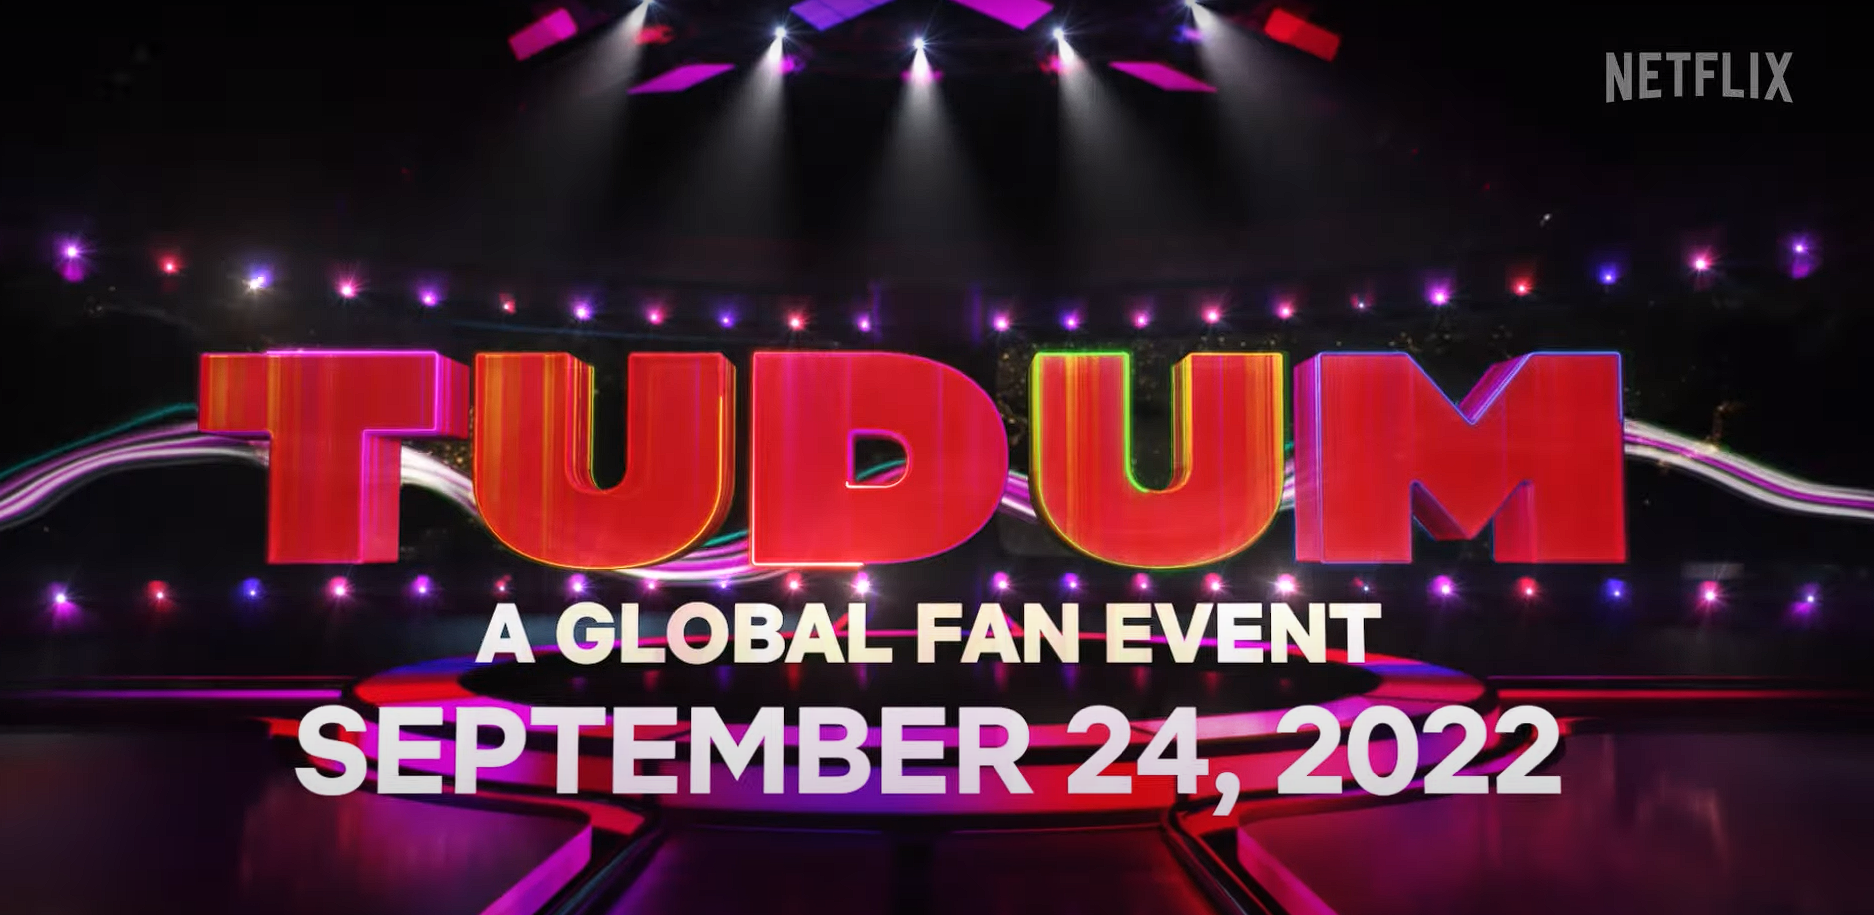 The Global Netflix Virtual Event TUDUM is Coming Back on September 24, 2022